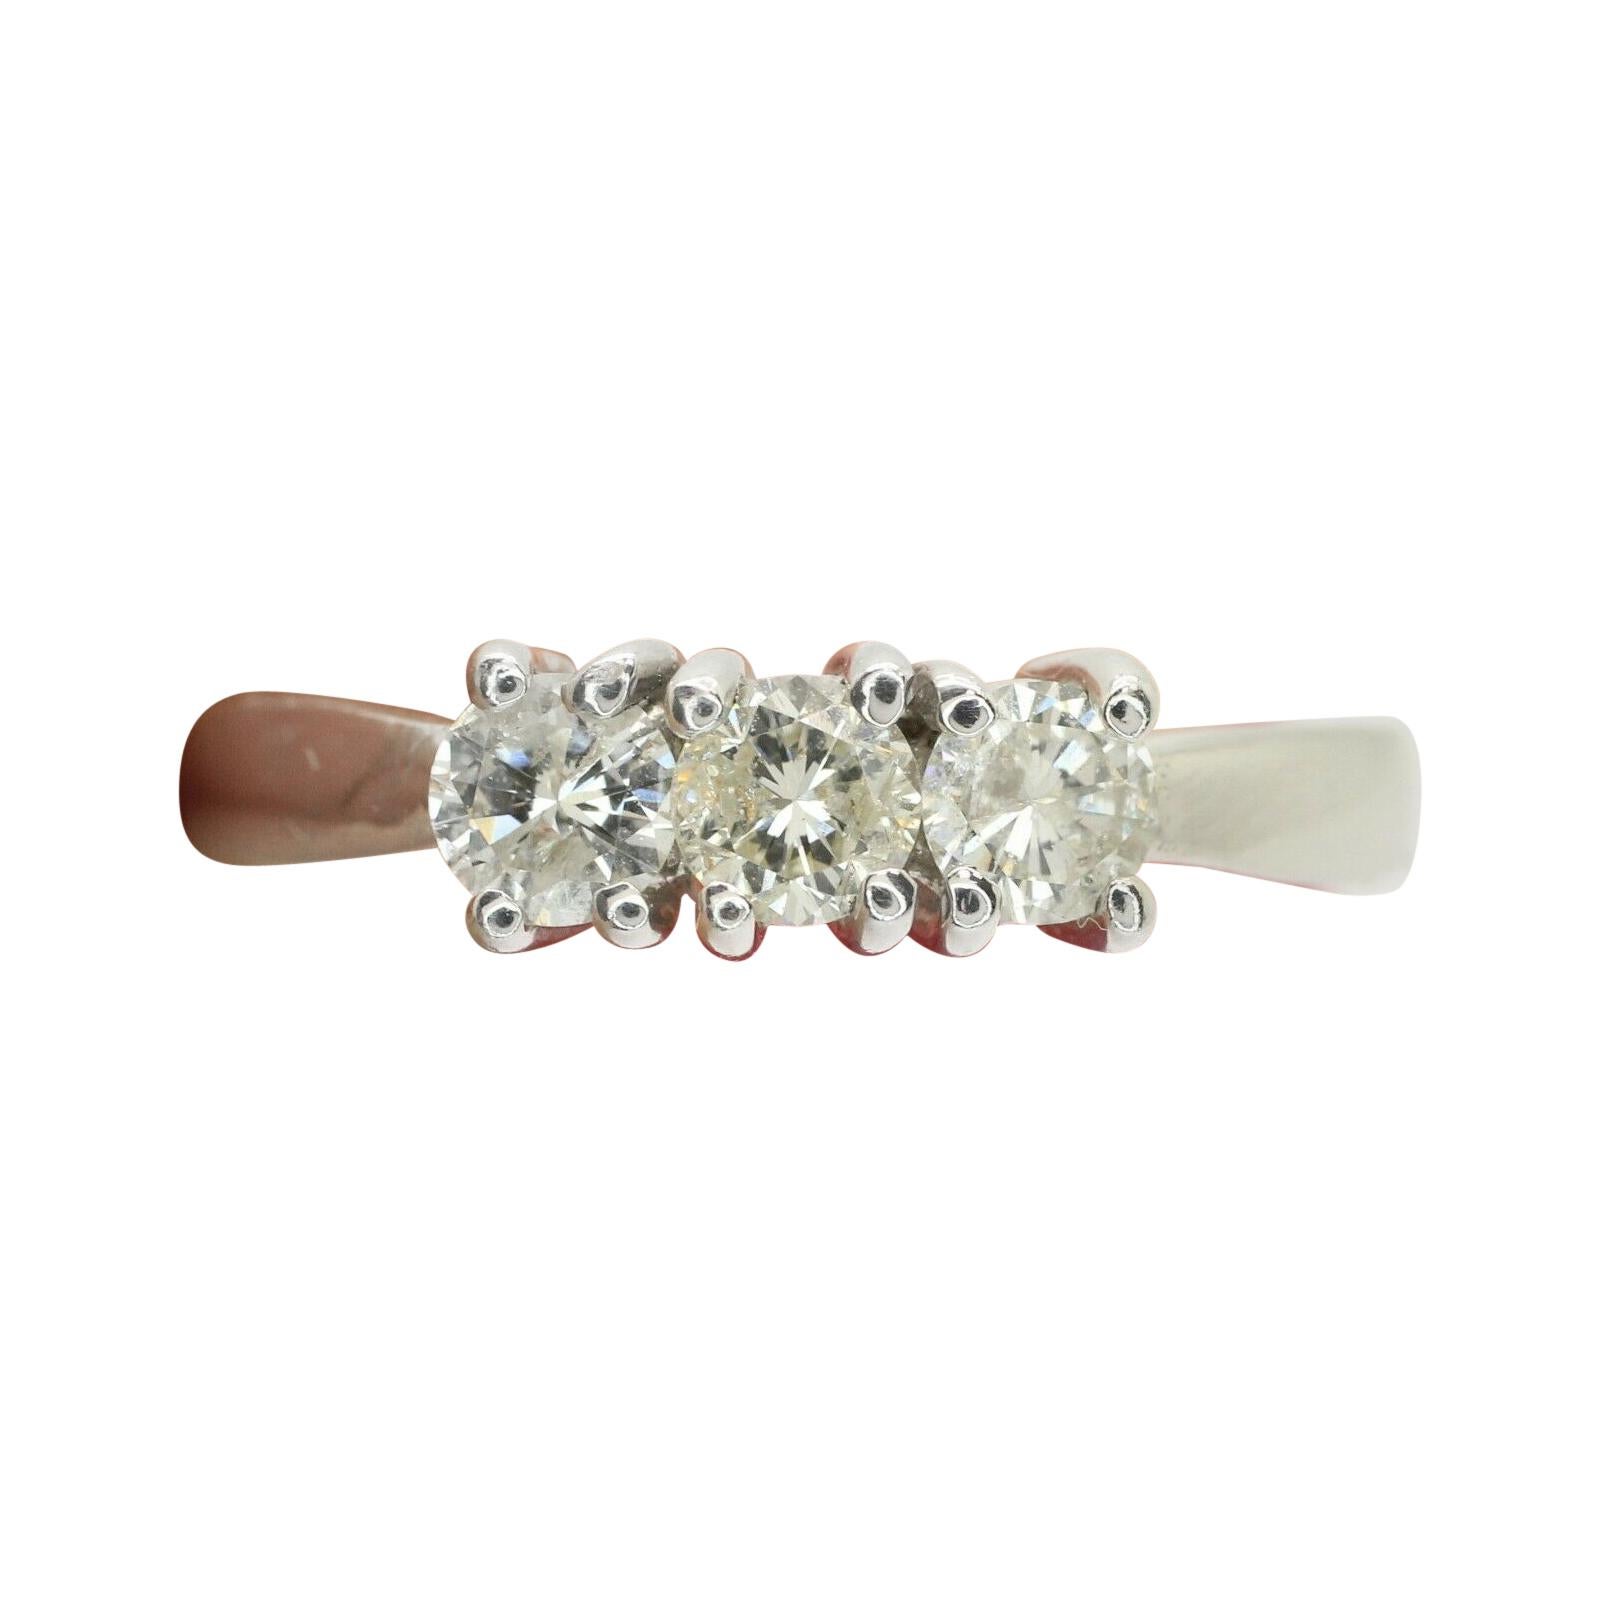 This Beautiful 14k Solid Gold 3 Stone Ring Decorated with Natural Diamonds